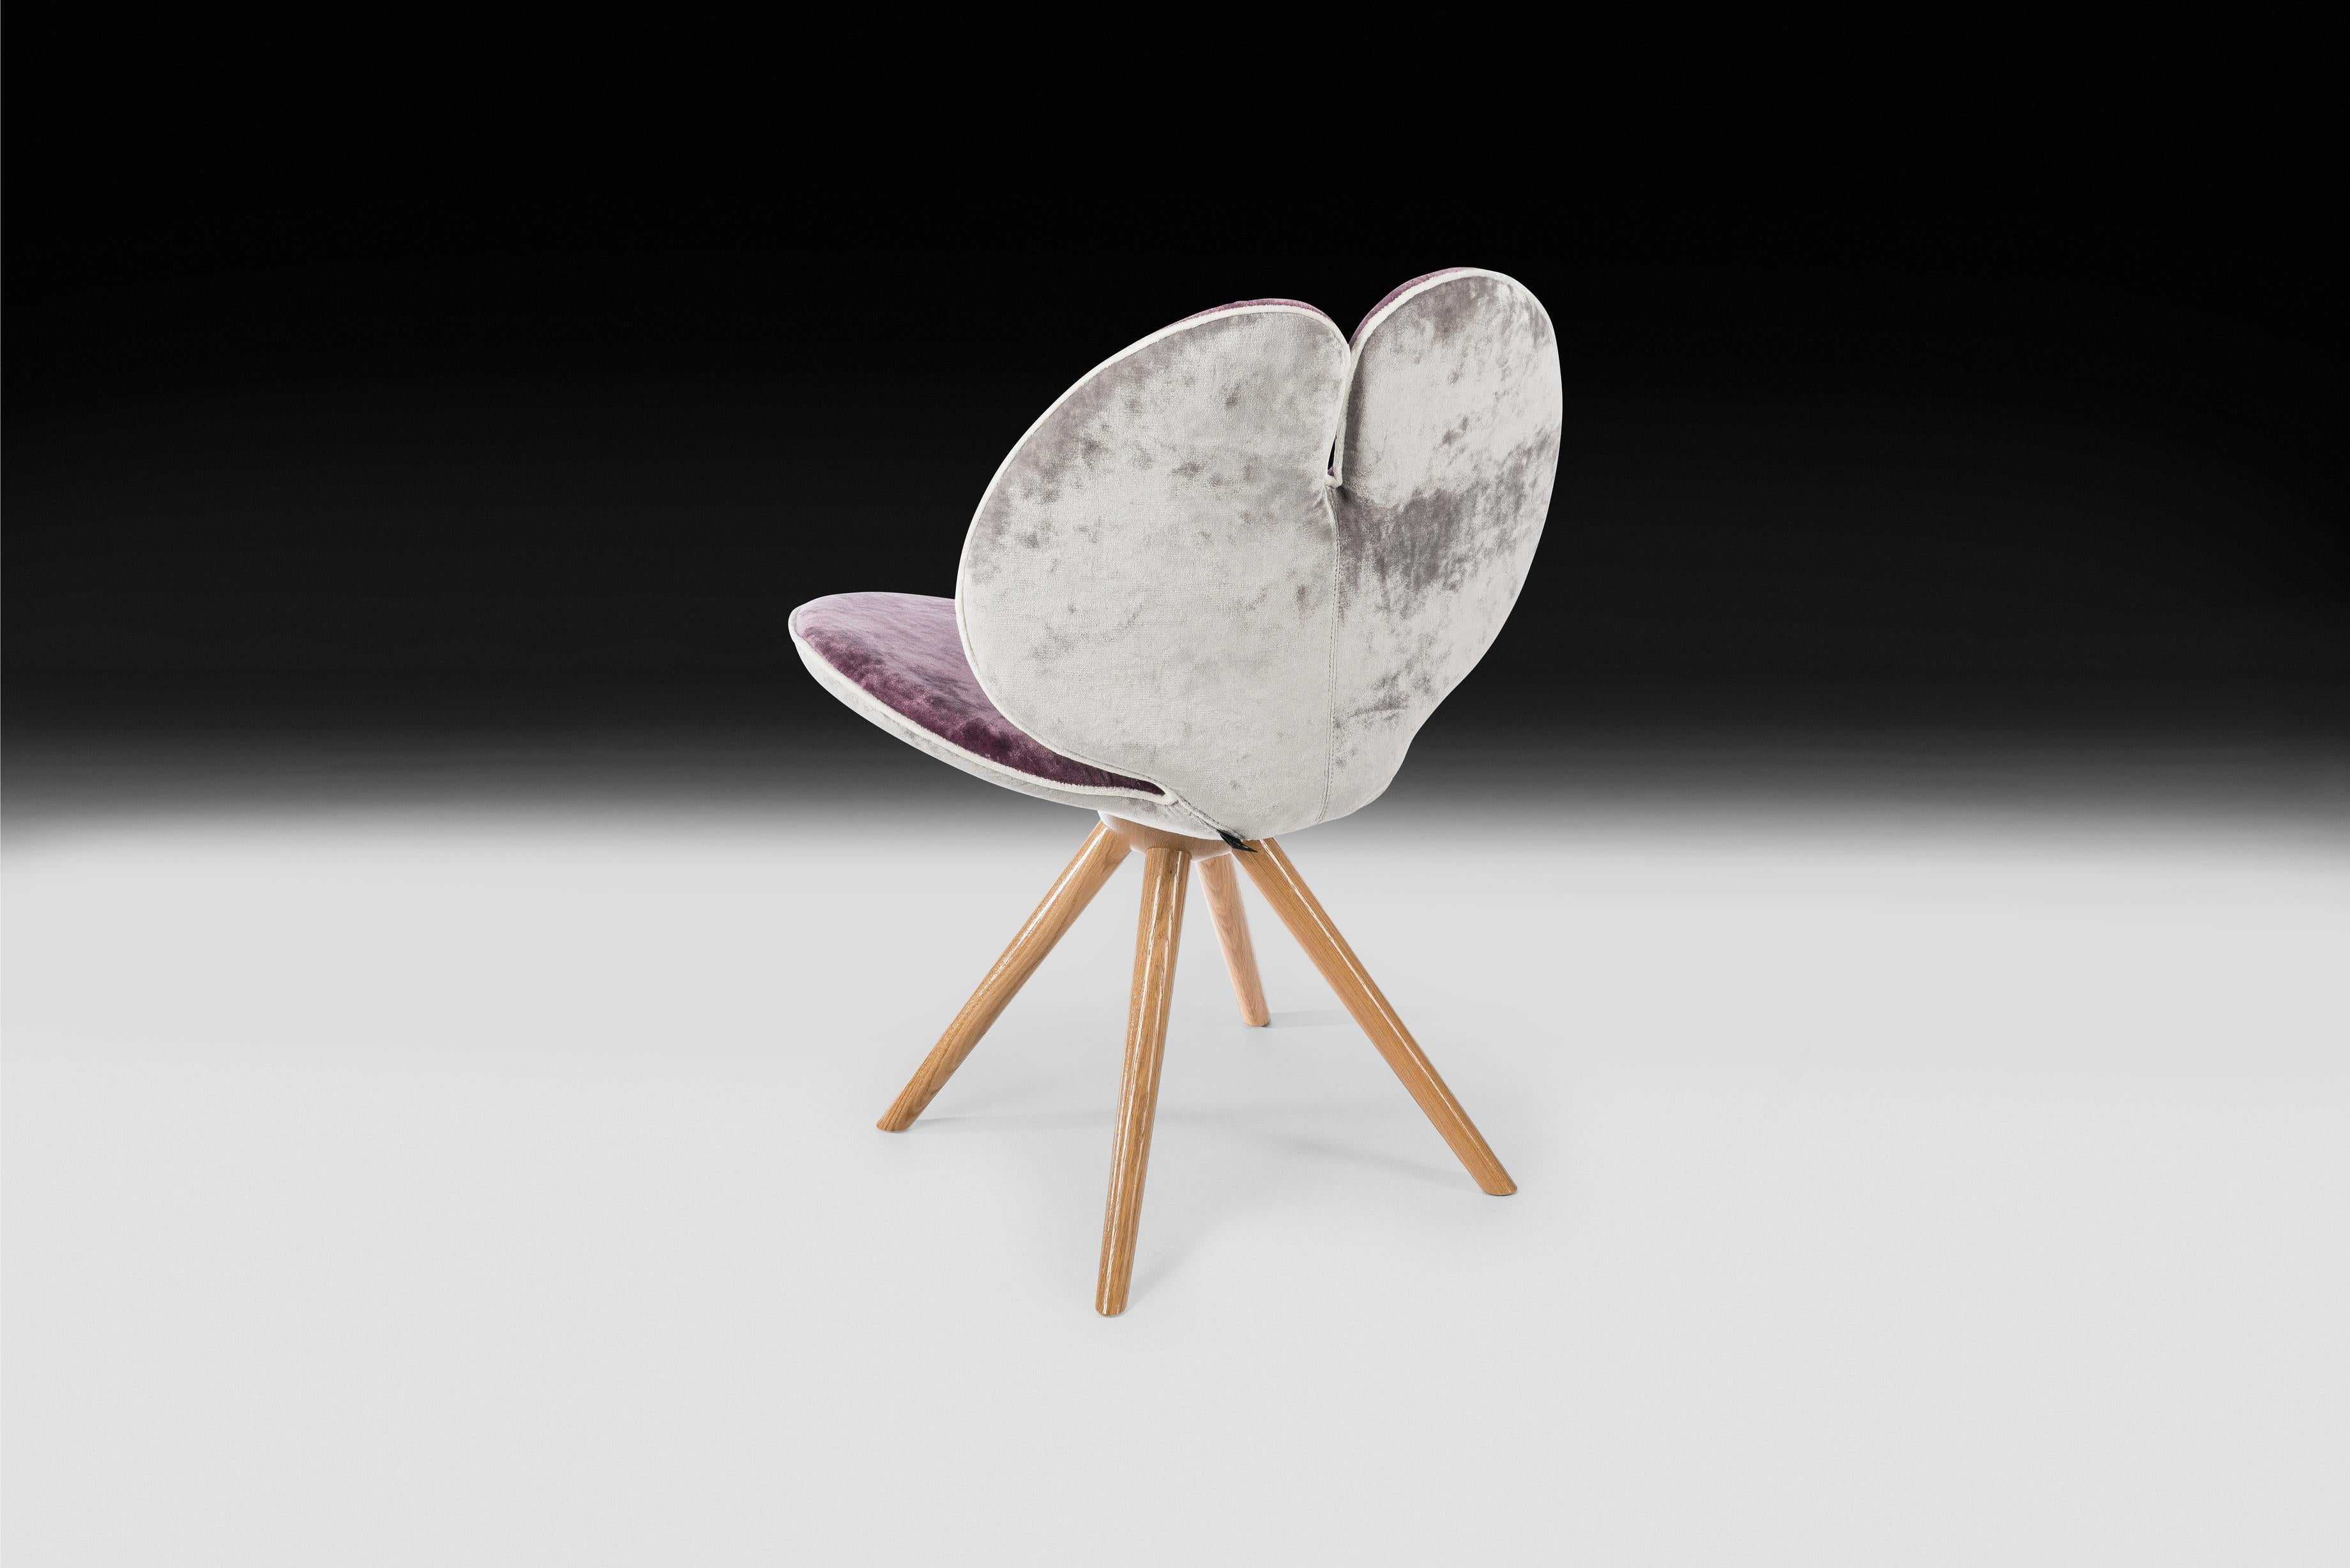 Modern Chair New Pansé, Plum Velvet Fabric, Made in Italy For Sale